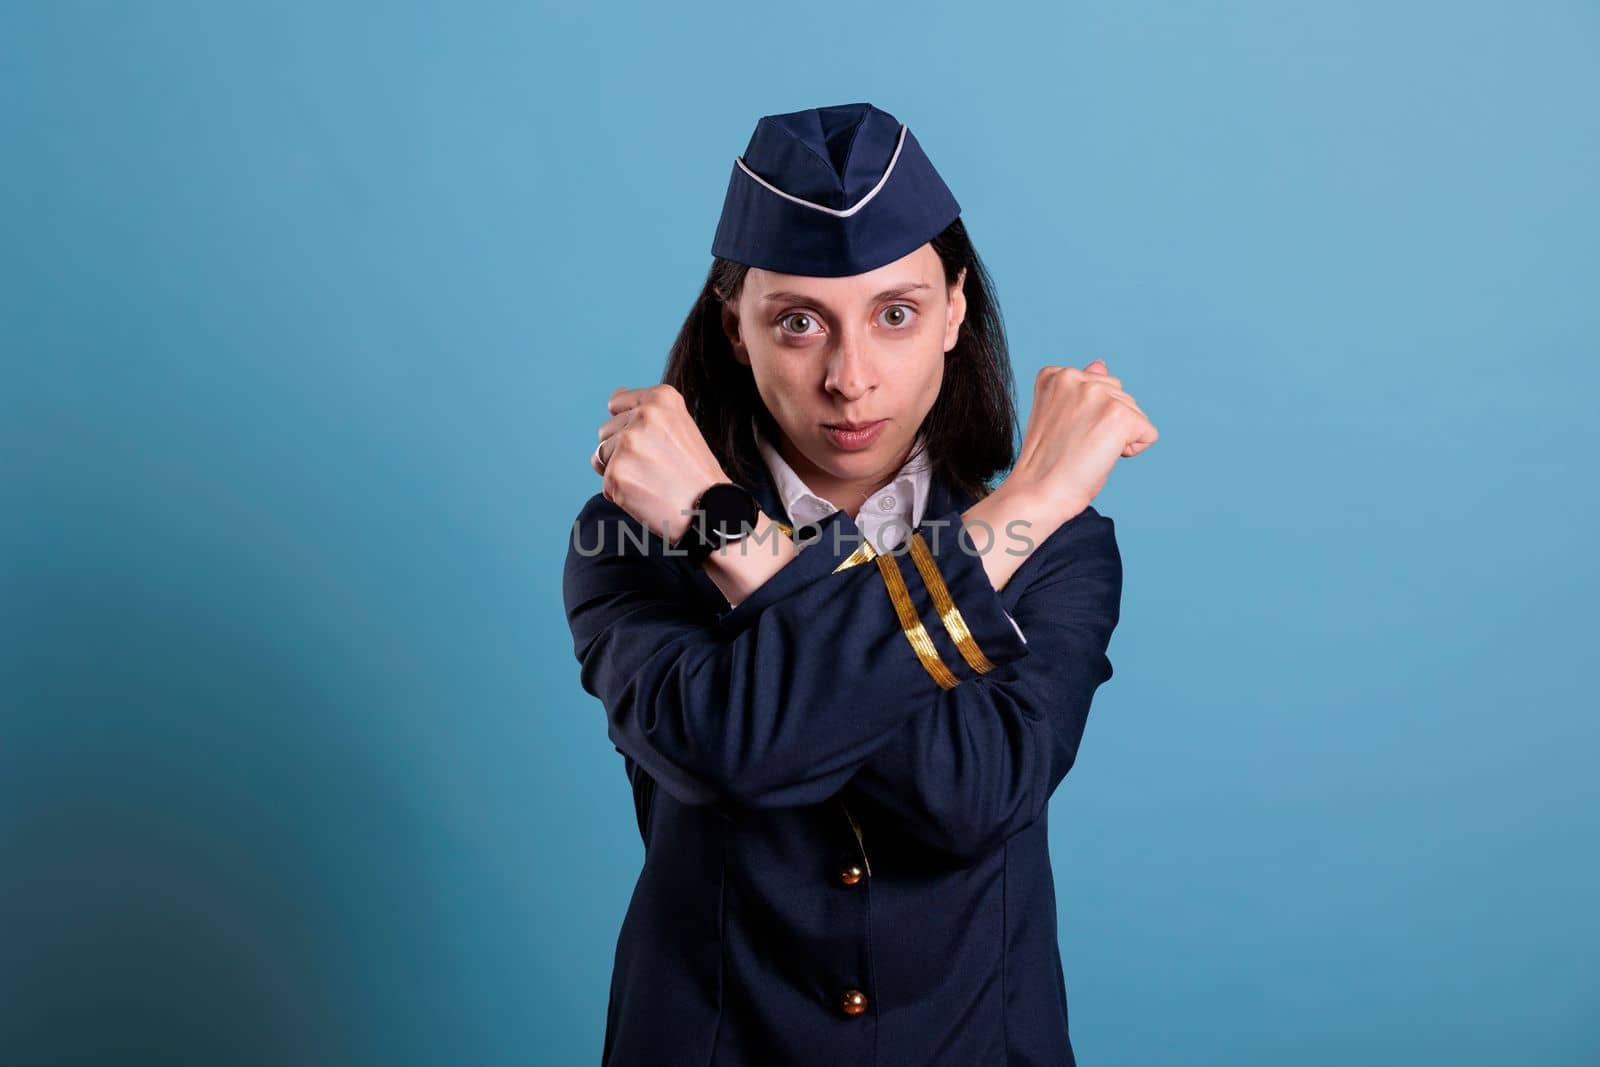 Flight attendant showing stop gesture with crossed arms by DCStudio